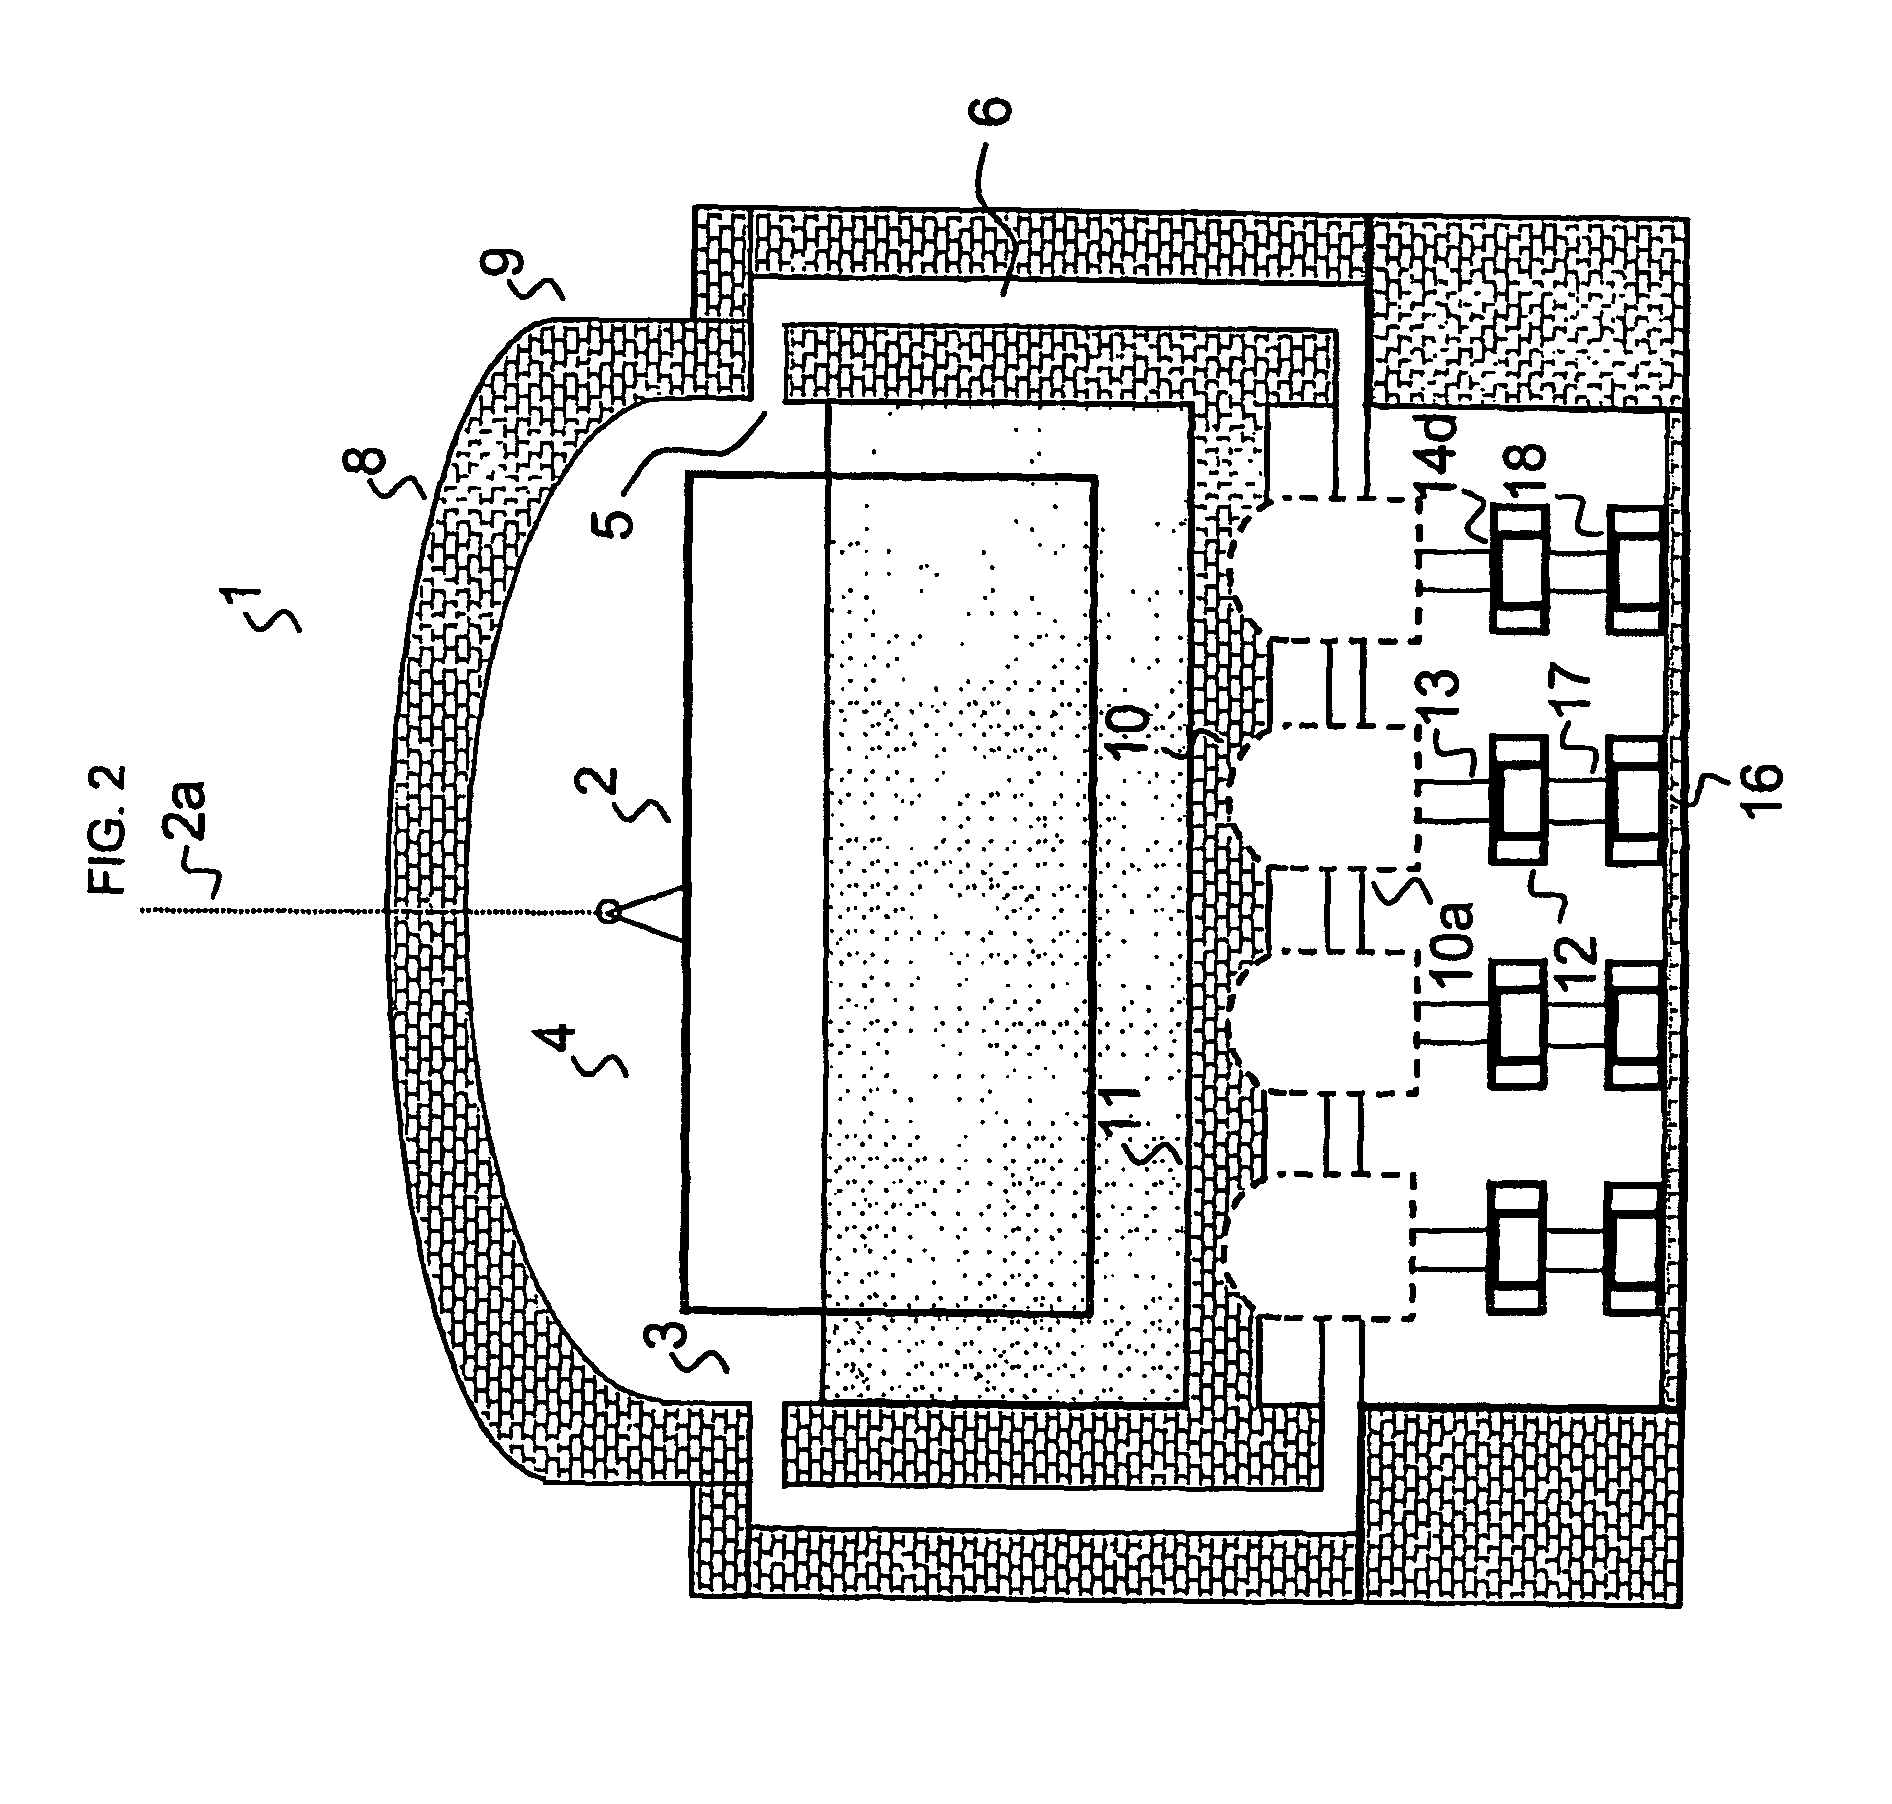 Controllable air ducts for feeding of additional combustion air into the area of flue gas channels of coke oven chambers